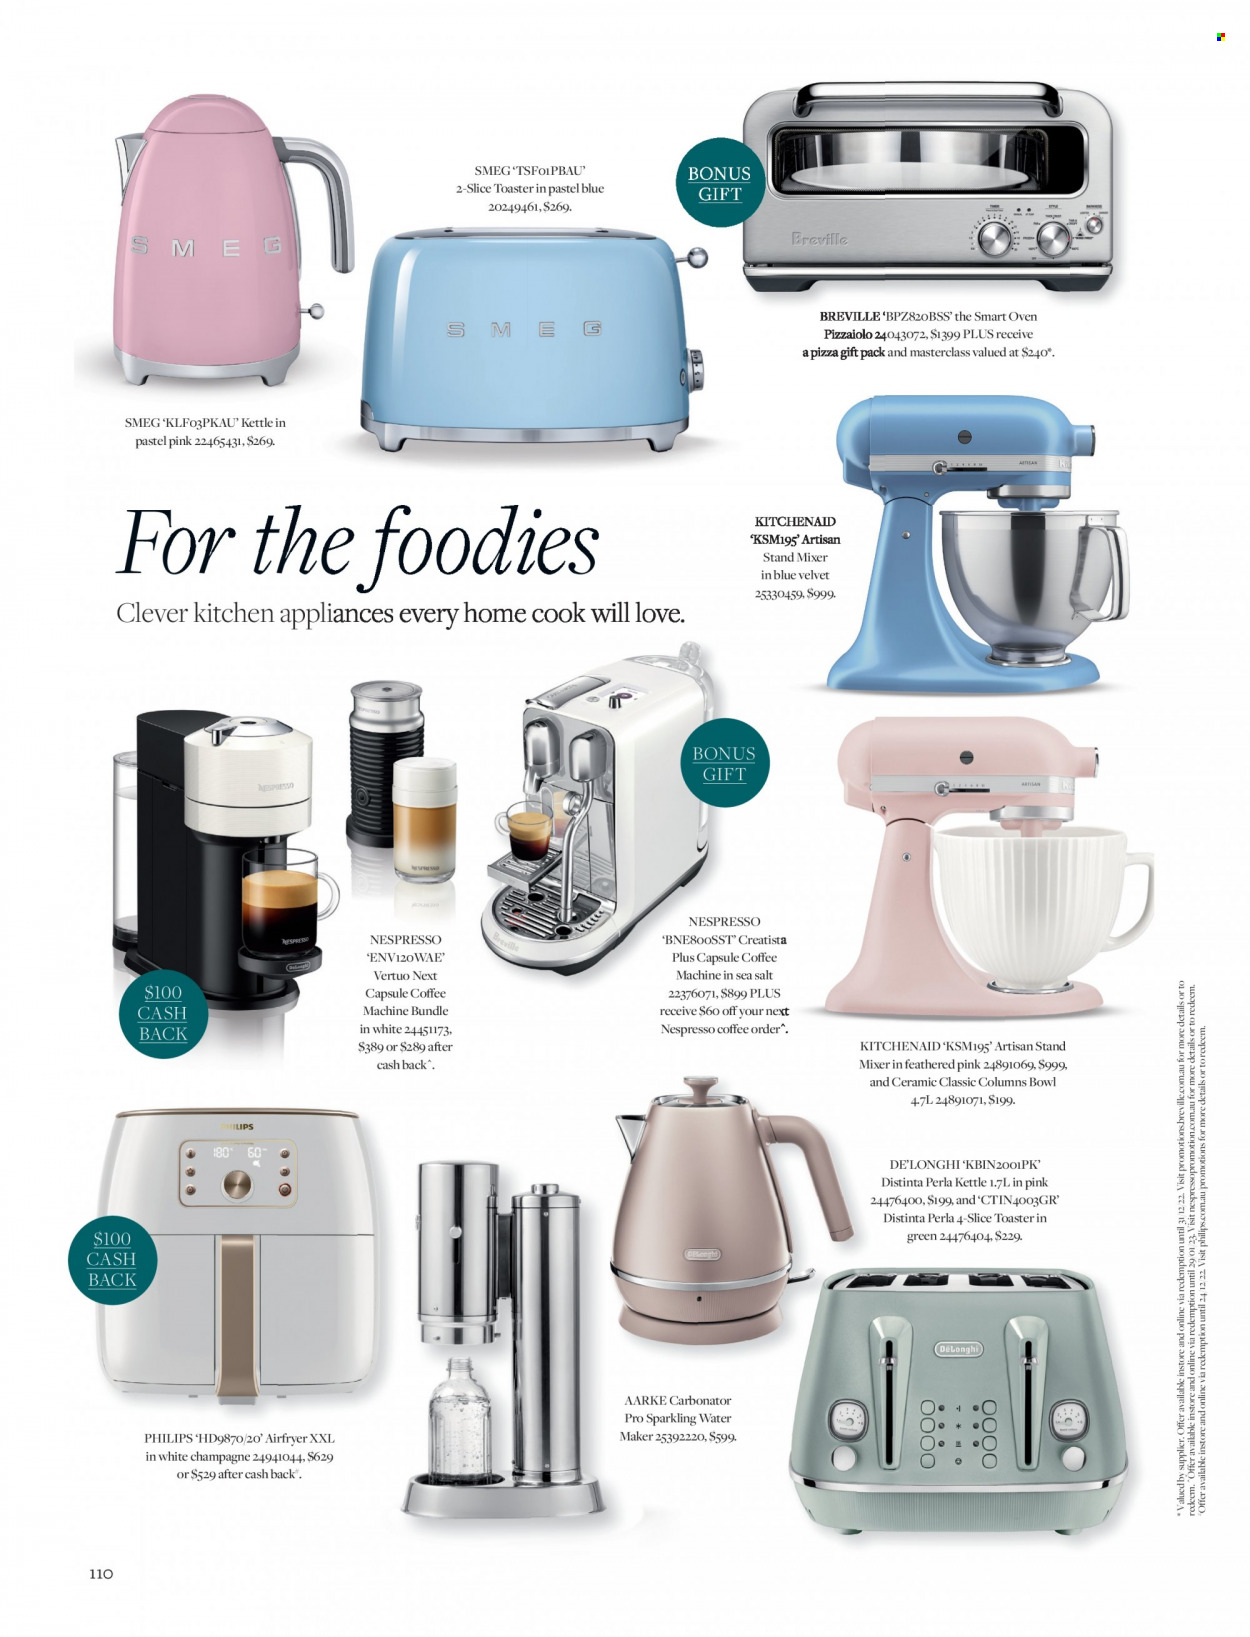 thumbnail - David Jones Catalogue - 31 Oct 2022 - 24 Dec 2022 - Sales products - Philips, kettle, sea salt, sparkling water, Nespresso, champagne, KitchenAid, Smeg, bowl, oven, coffee machine, capsule coffee machine, De'Longhi, mixer, stand mixer, air fryer, toaster, water maker. Page 110.